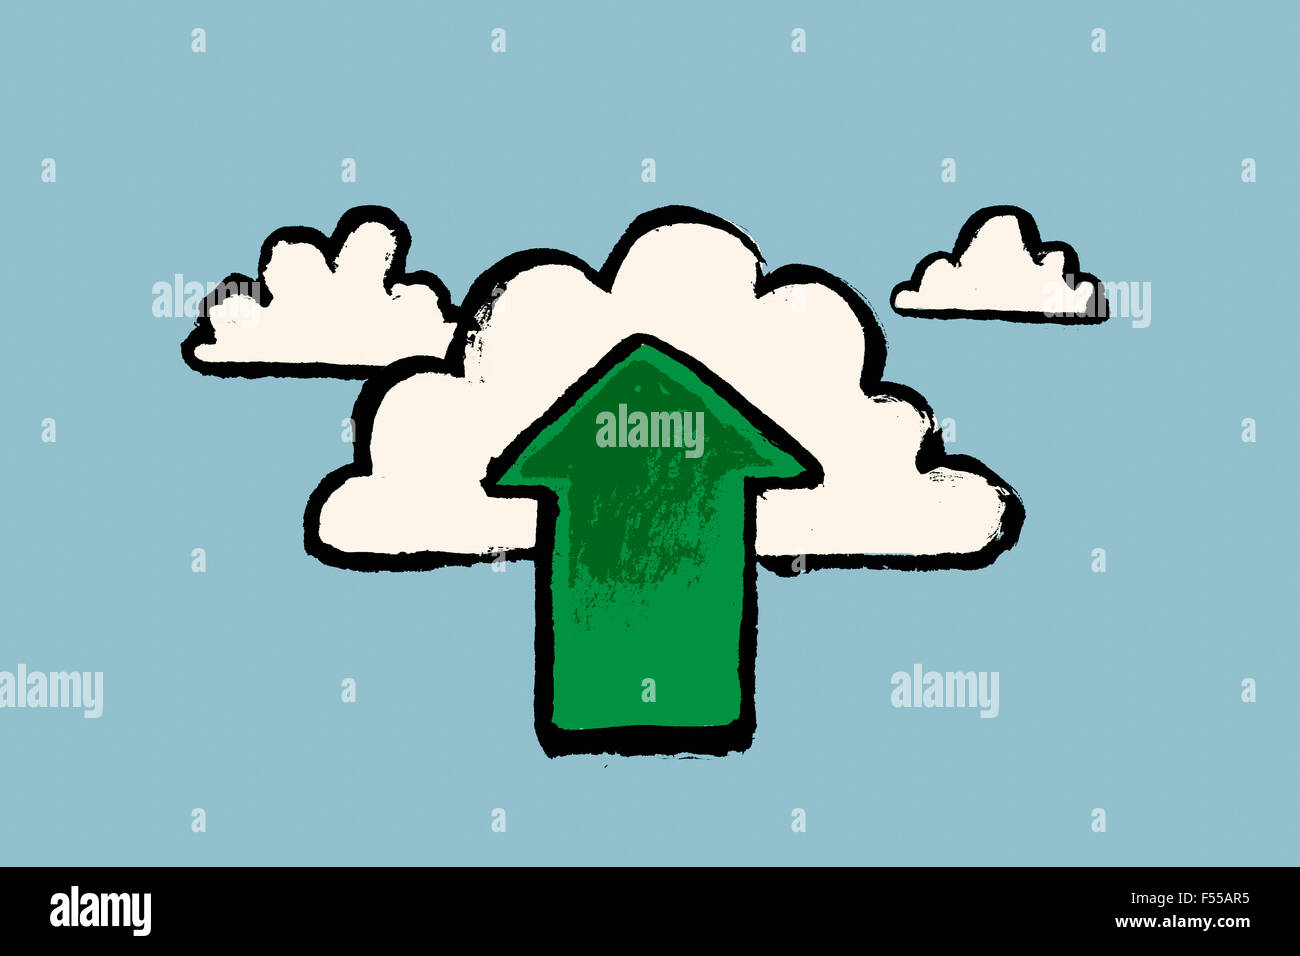 Illustration of clouds and green arrow symbol against blue background Stock Photo